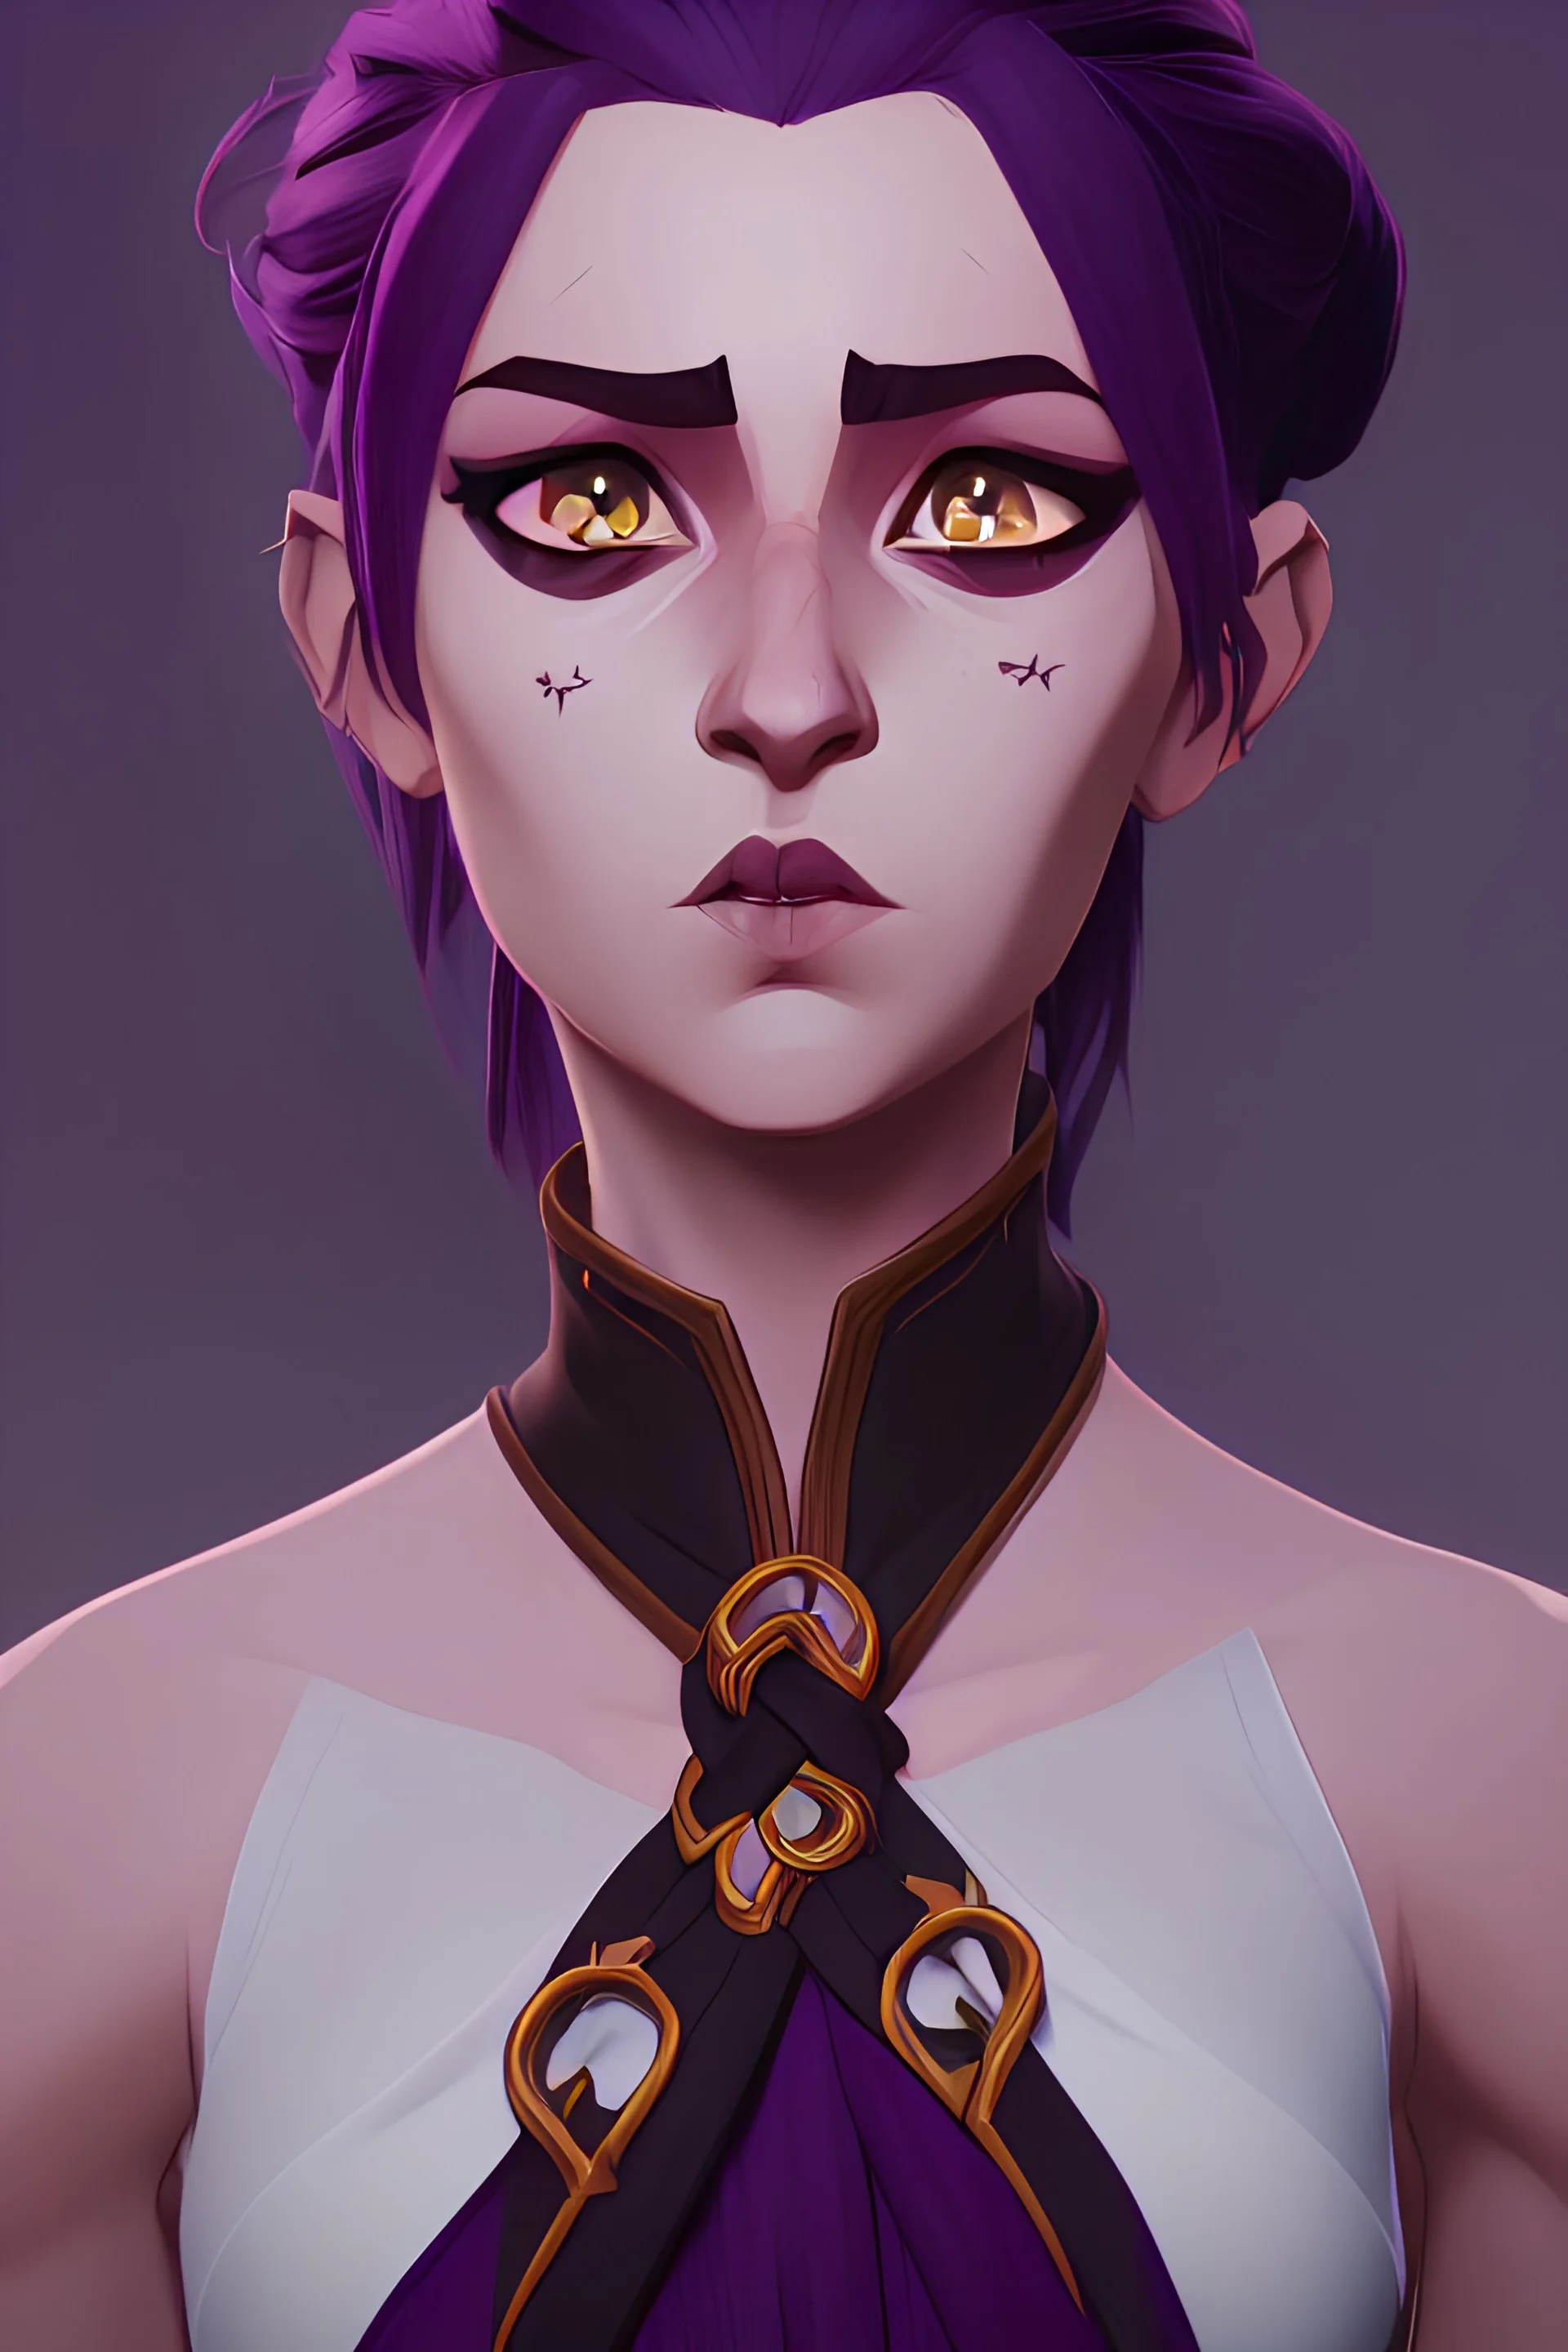 1 girl,portrait, beautiful,tiefling, bard, purple skin, fiery glowing eyes, A pair of symmetrical horns protruding from her forehead, long black hair tied up in a ponytail and braided sidebangs